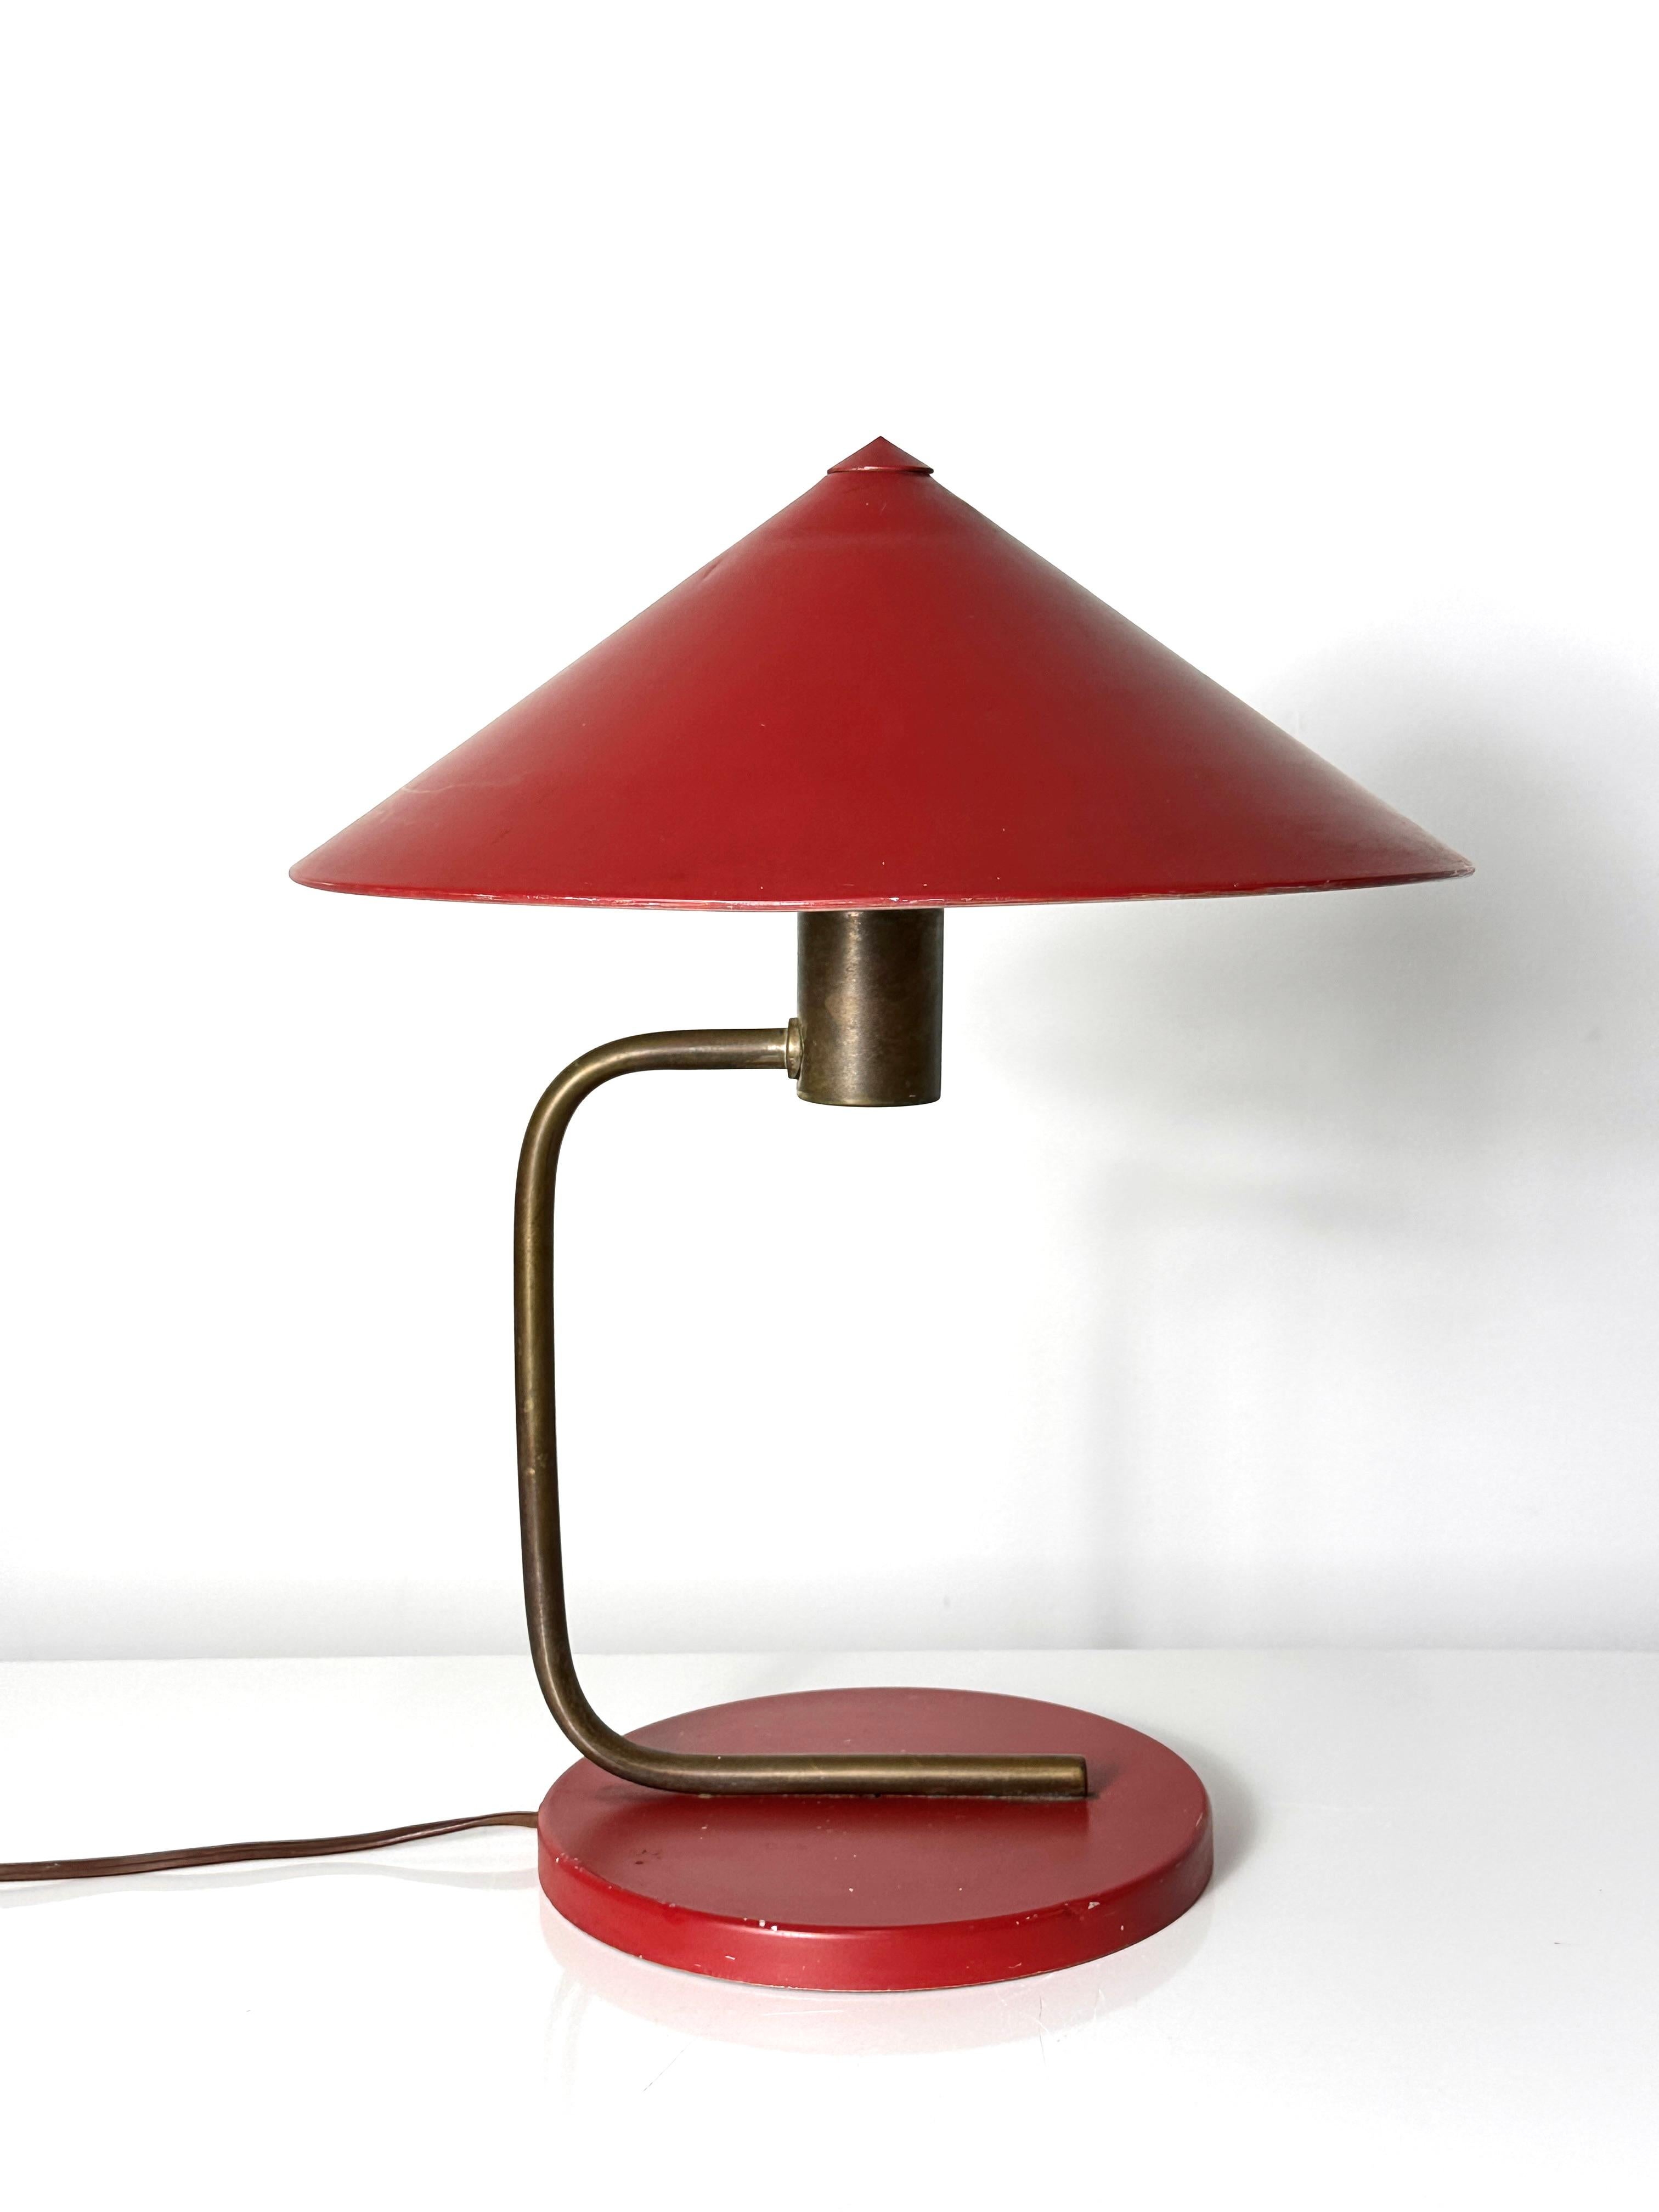 Walter Von Nessen Red Enamel and Brass Table Lamp 1930s Art Deco In Fair Condition For Sale In Troy, MI